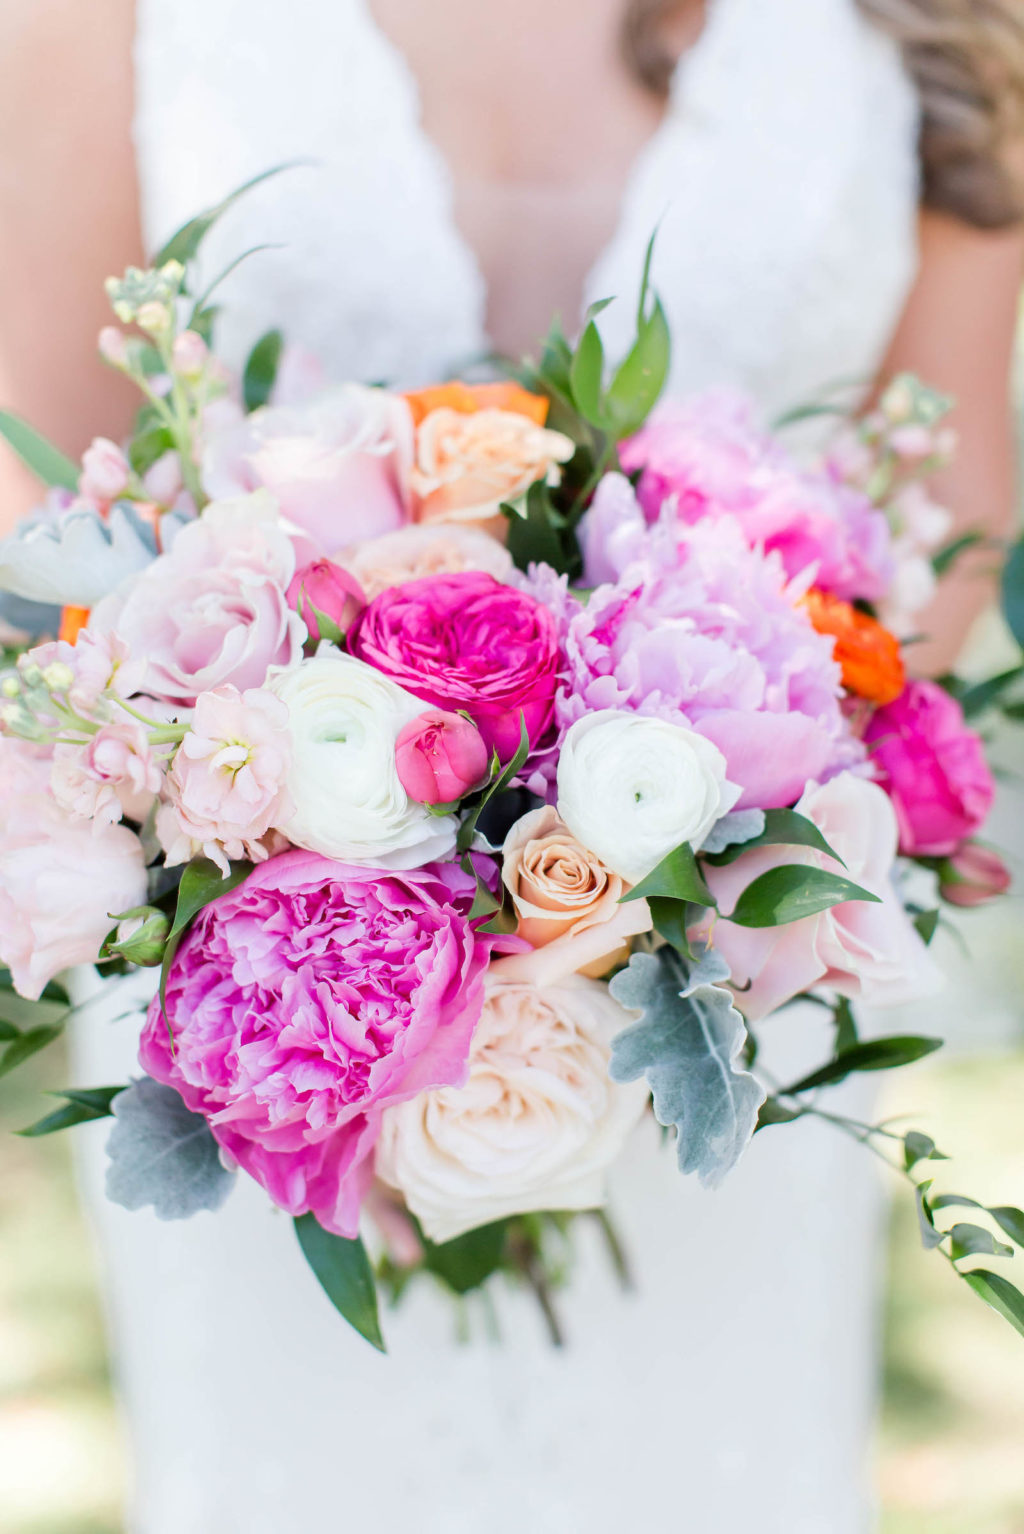 White and Pink Peonies Bridal Bouquet | Vibrant Garden Wedding Bouquet for the Florida Bride